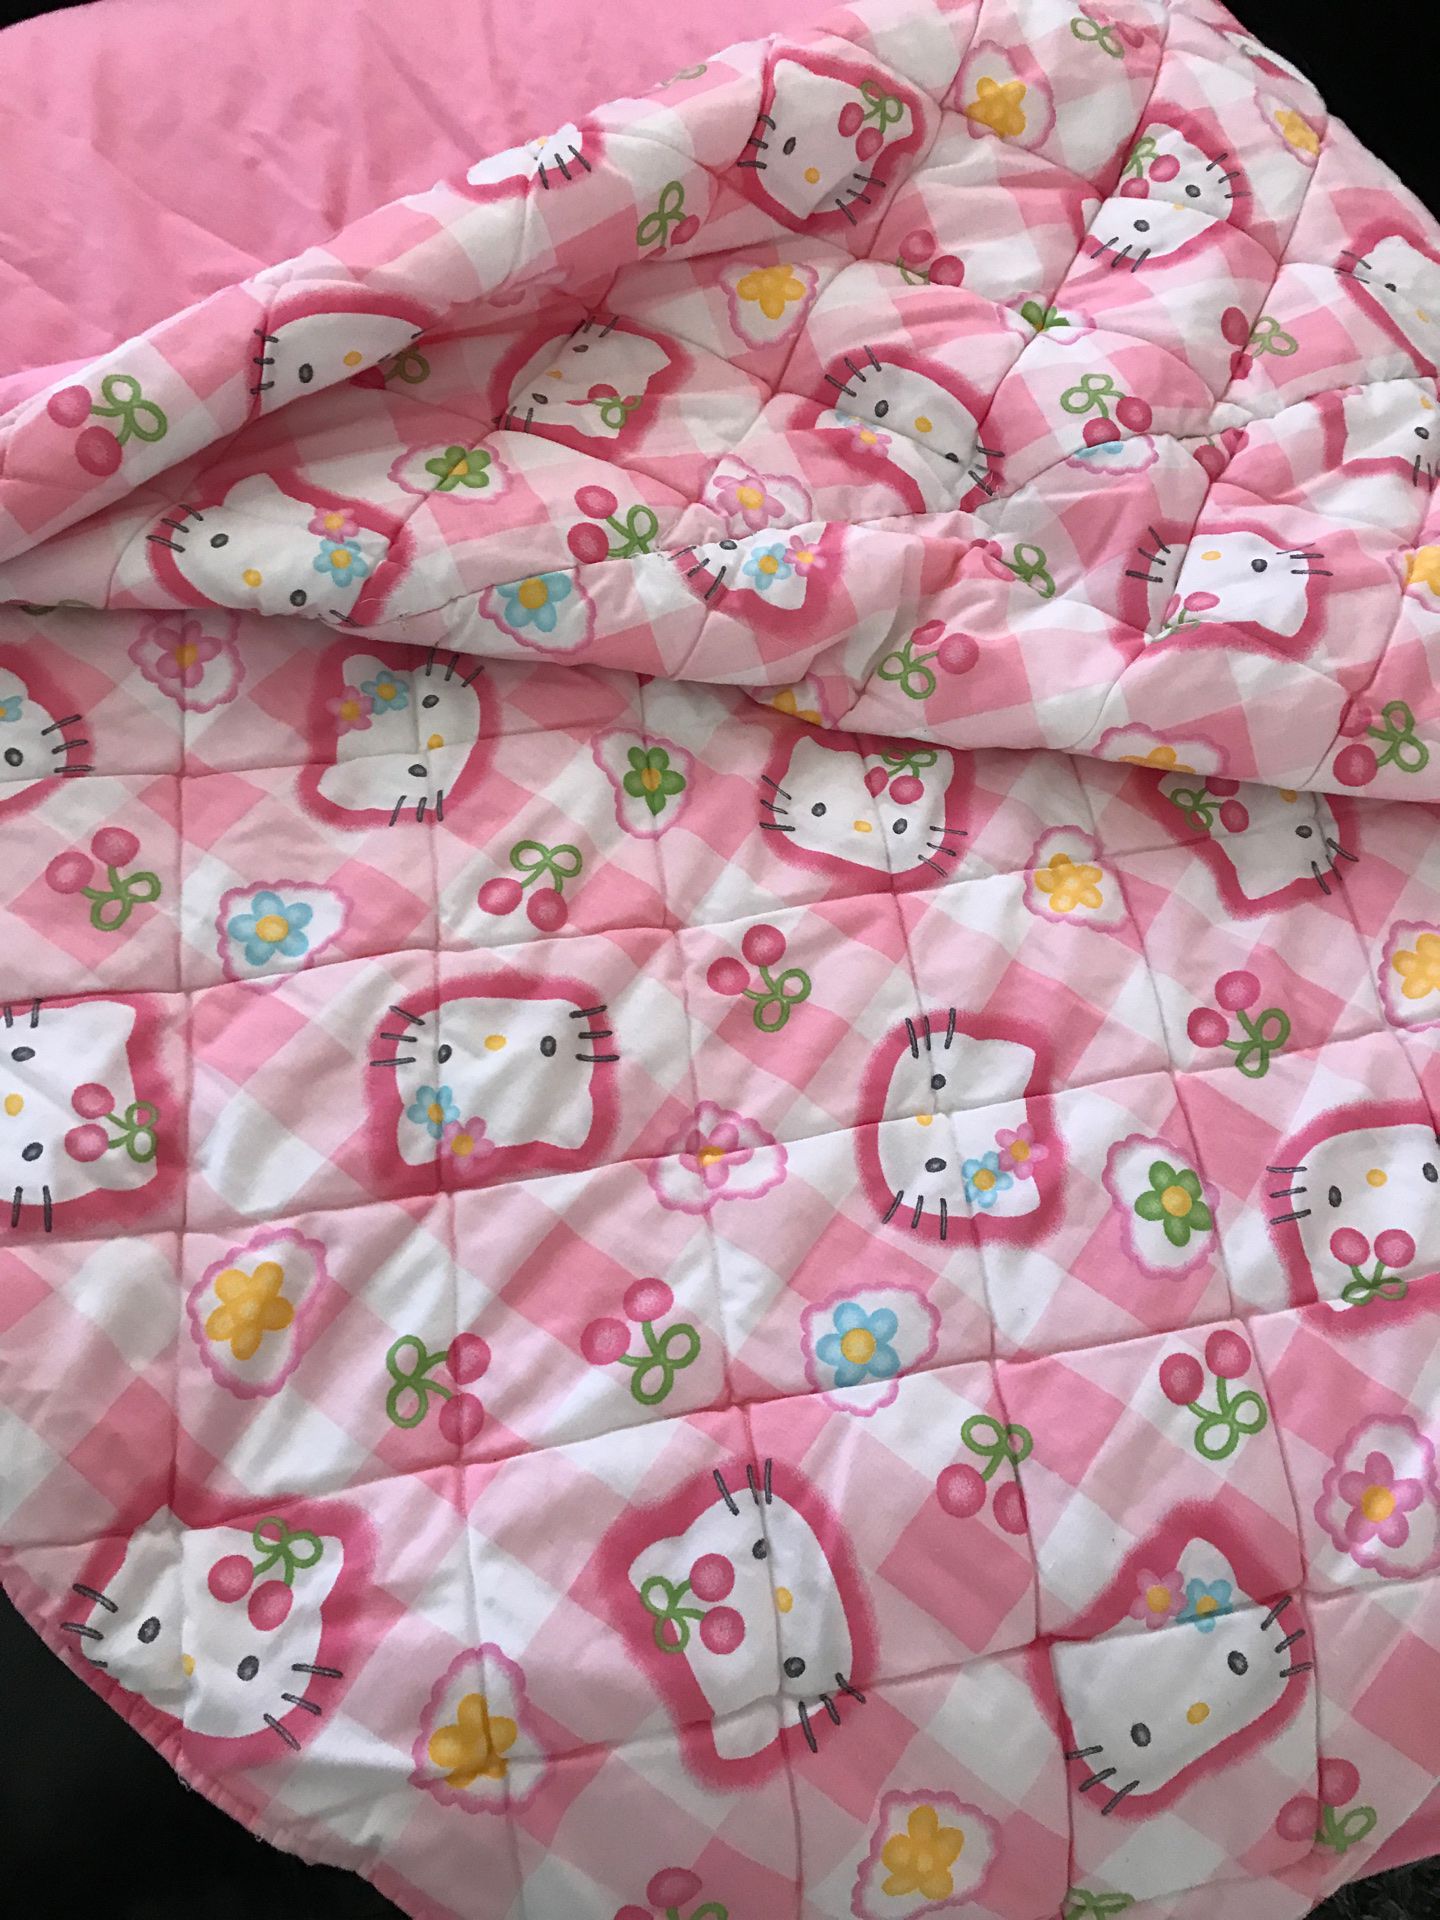 Full size hello kitty Duvet cover with zipper in back